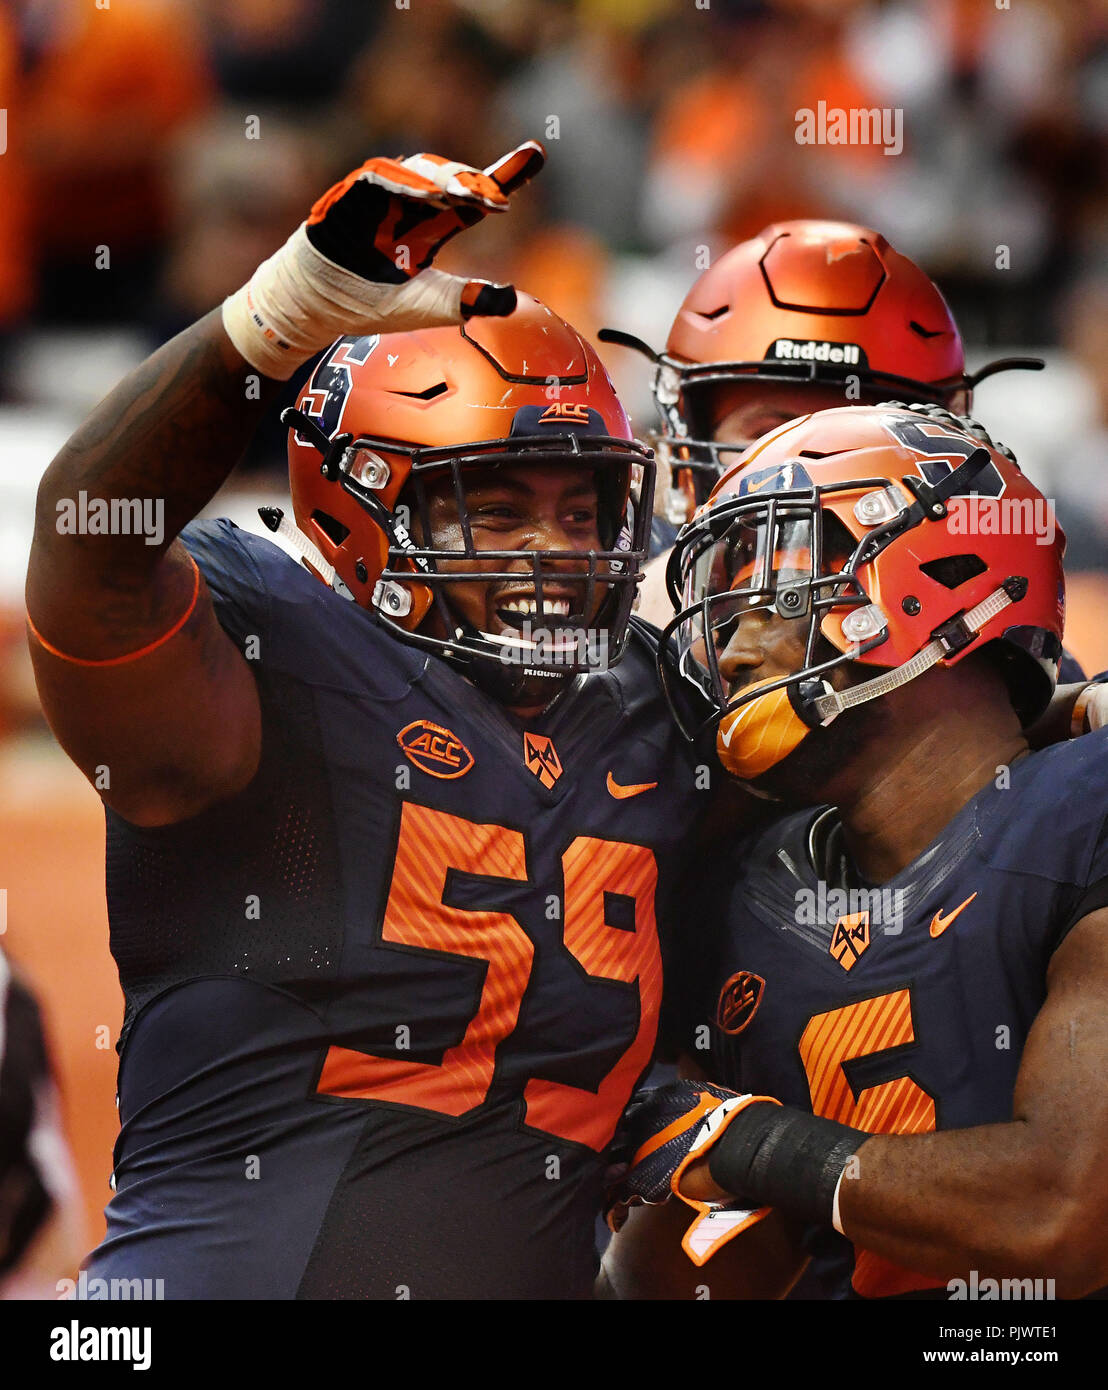 Syracuse, NY, USA. 8th Sep, 2018. Syracuse wide receiver Devin C. Butler #5 and Syracuse offensive lineman Aaron Roberts #59 celebrate as Syracuse defeated Wagner 62-10 at the Carrier Dome in Syracuse, NY. Photo by Alan Schwartz/Cal Sport Media/Alamy Live News Stock Photo